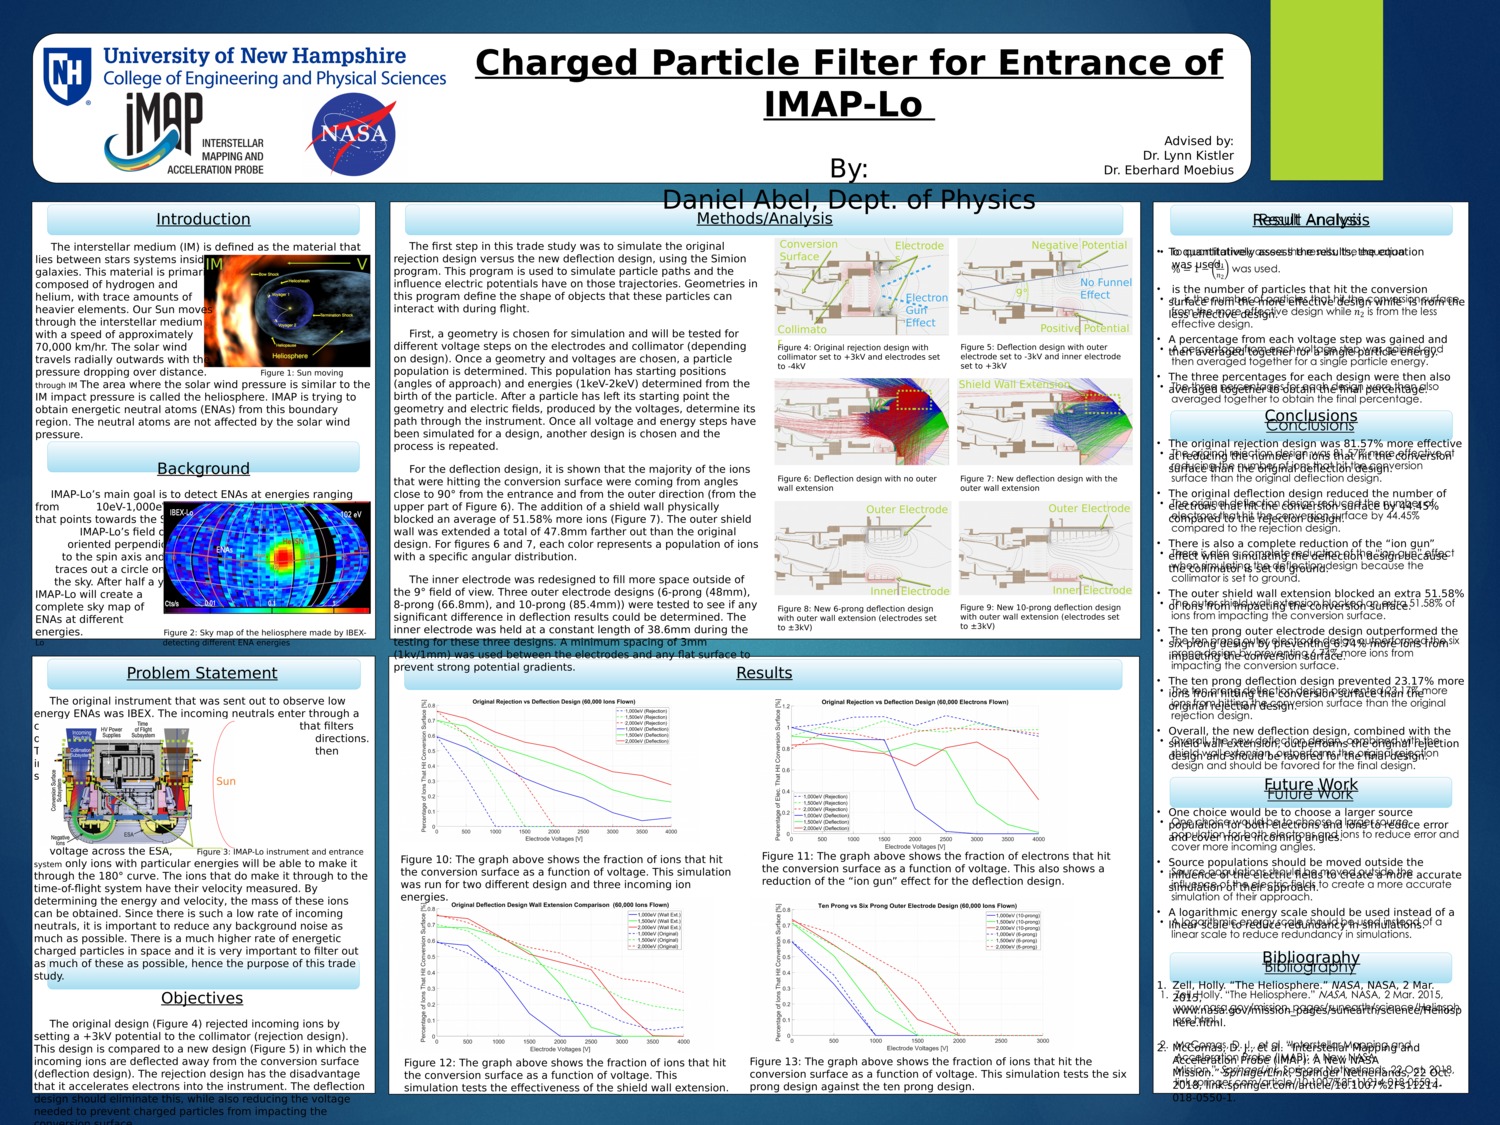 Charged Particle Filter For Entrance Of Imap-Lo by dca1000